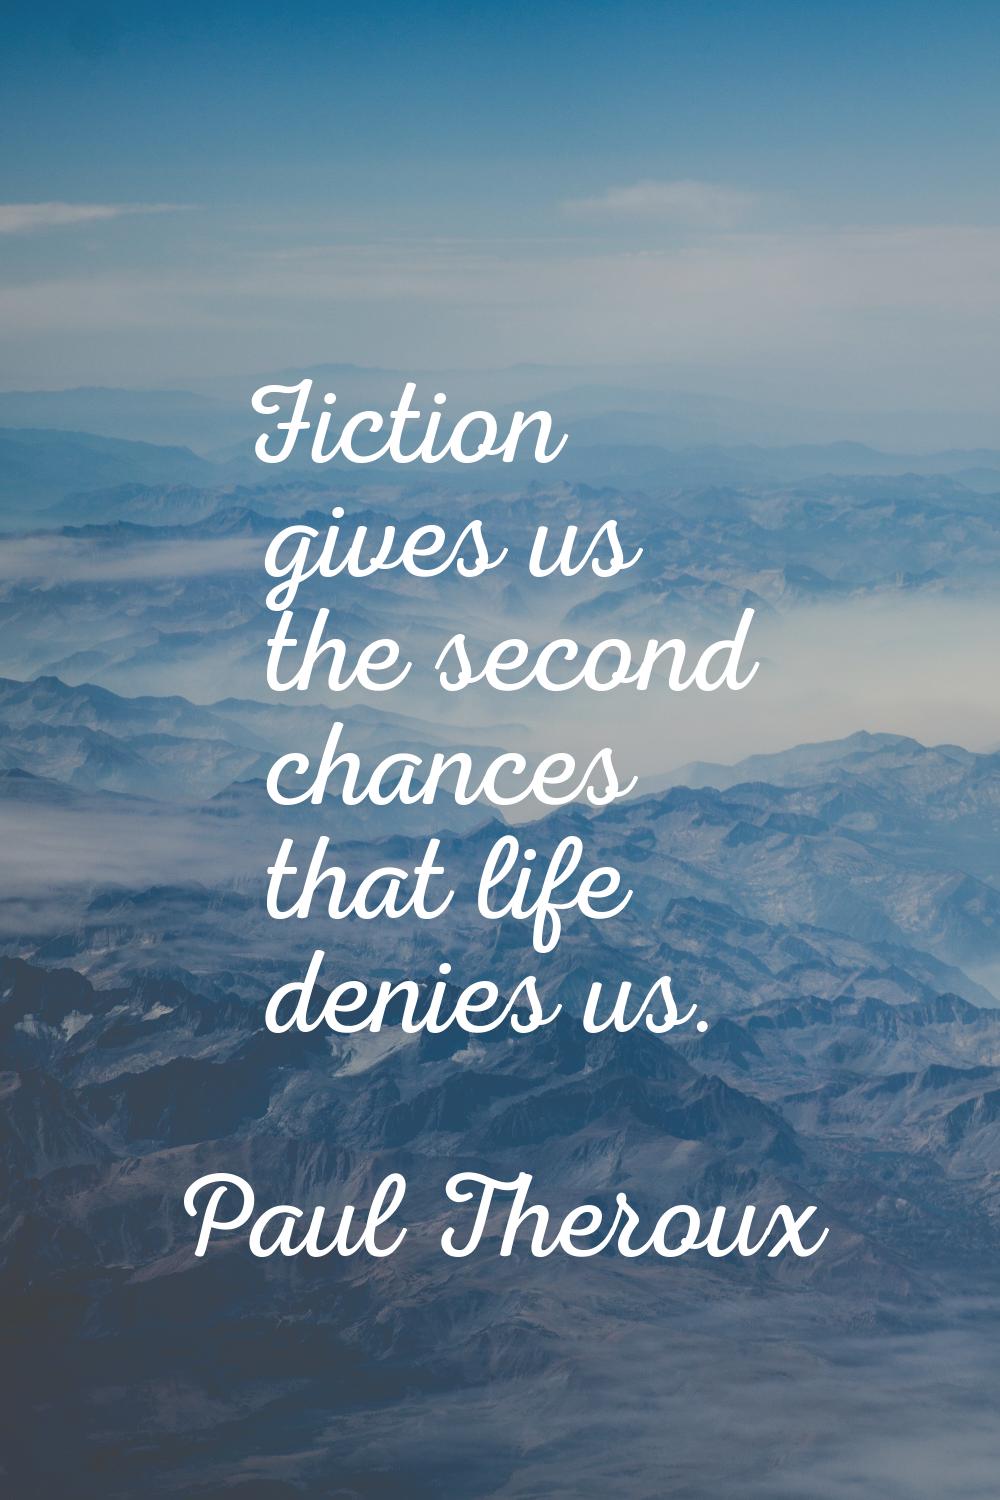 Fiction gives us the second chances that life denies us.